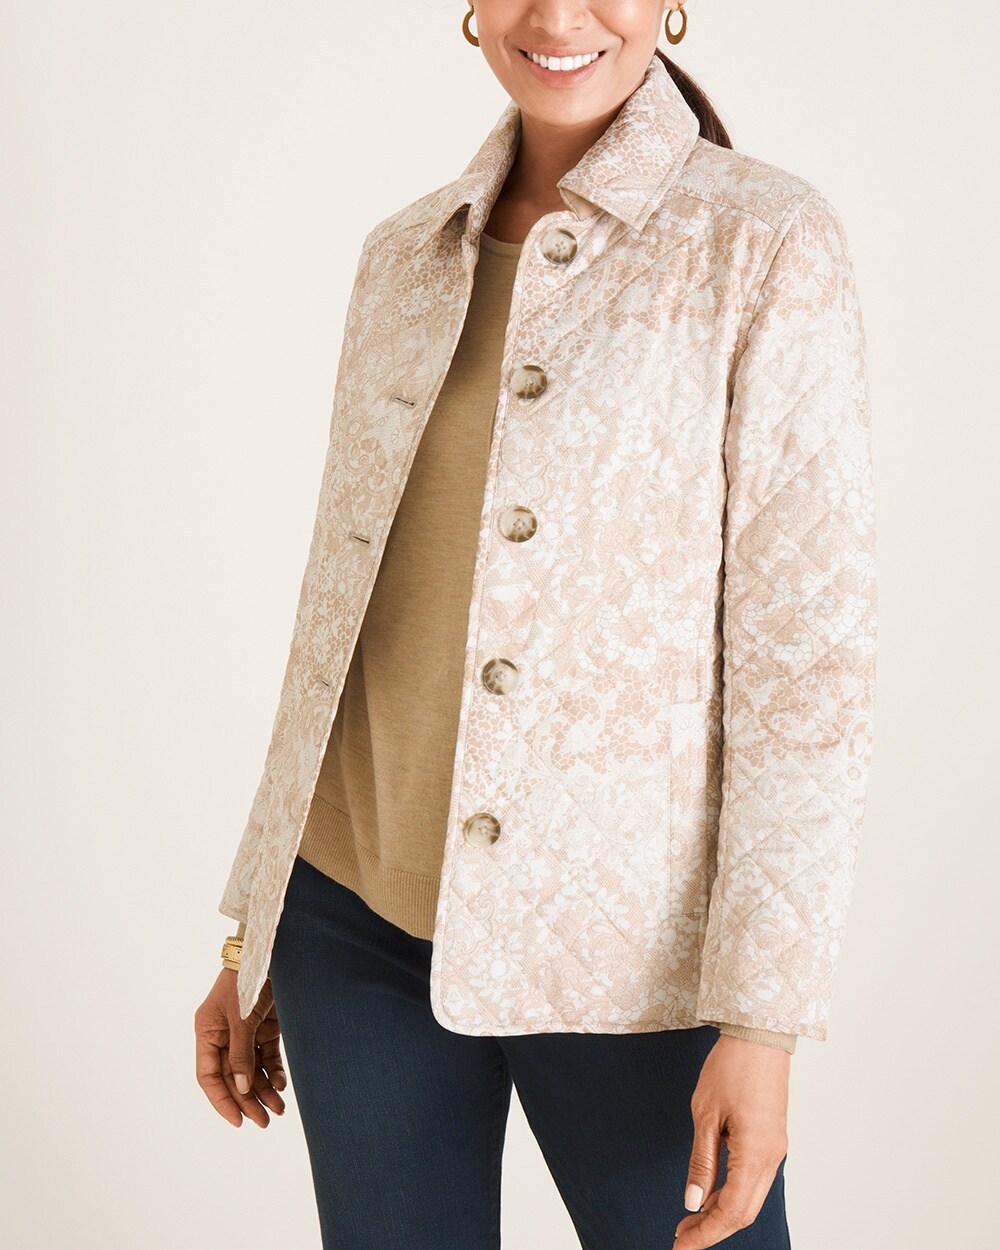 Lace-Print Quilted Jacket